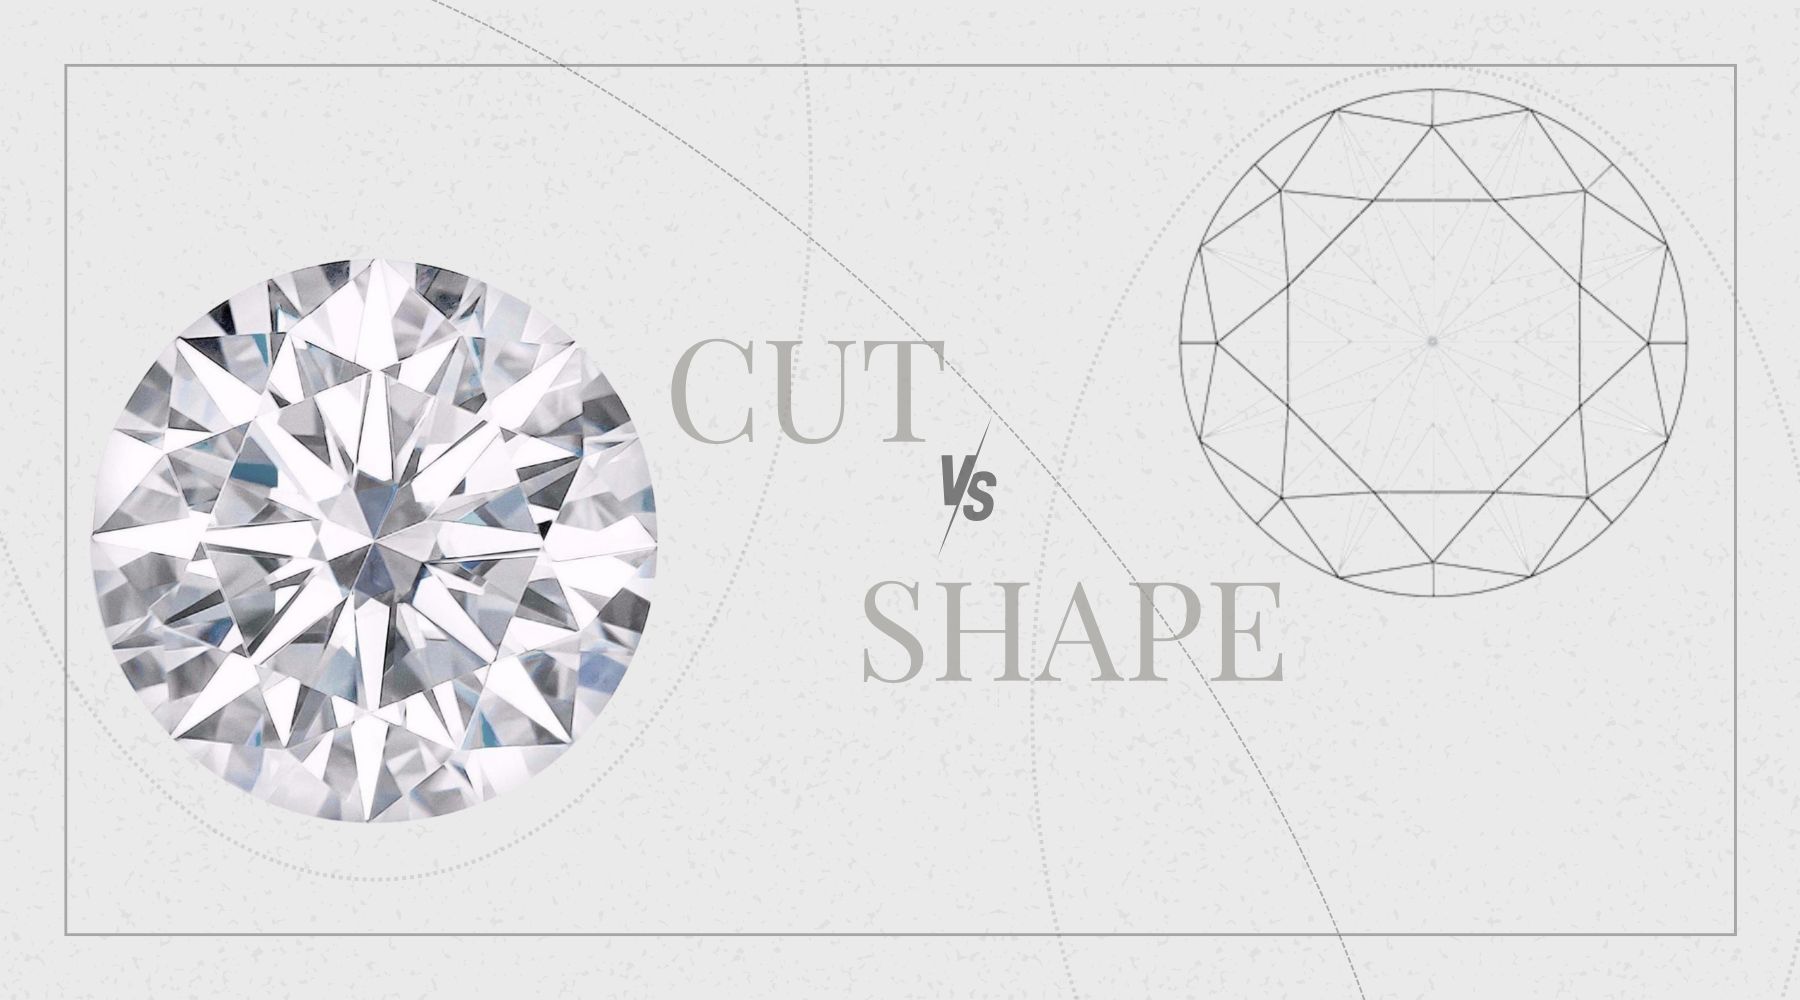 What is the difference between the cut and shape of a diamond